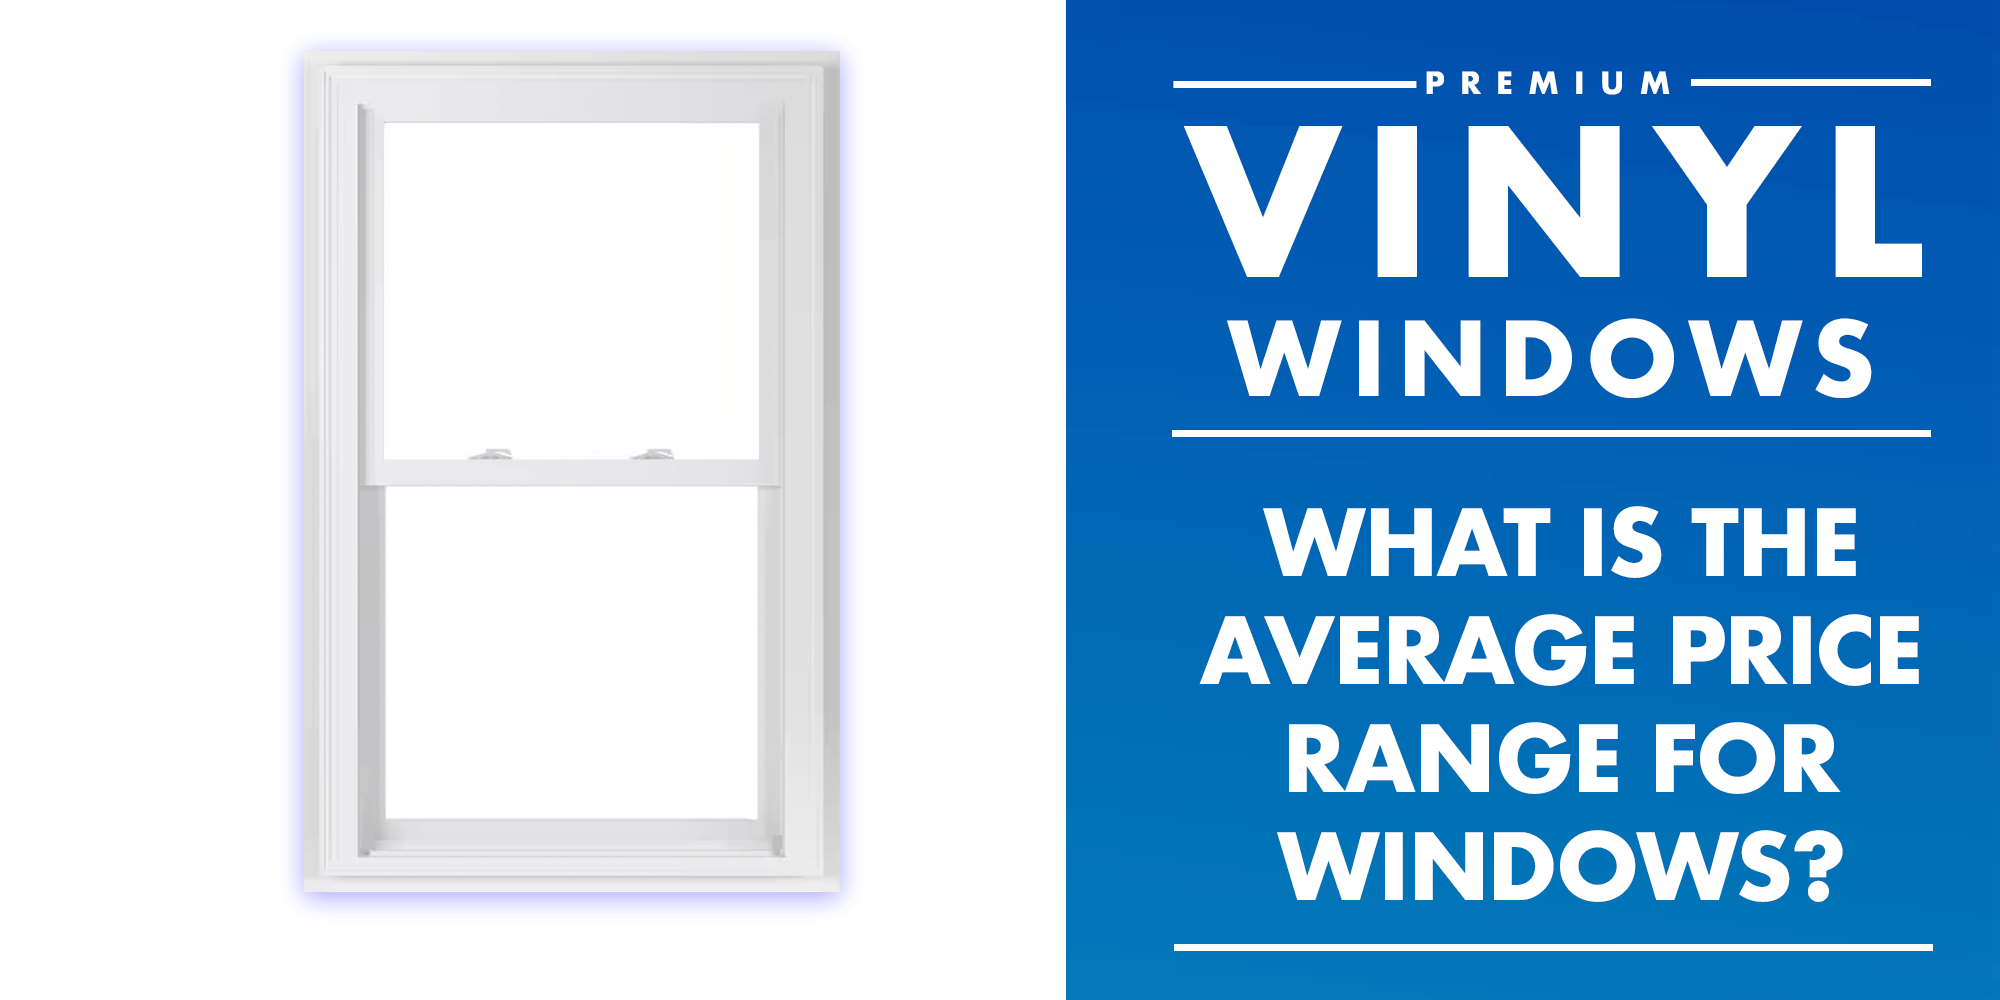 What is the average price range for windows